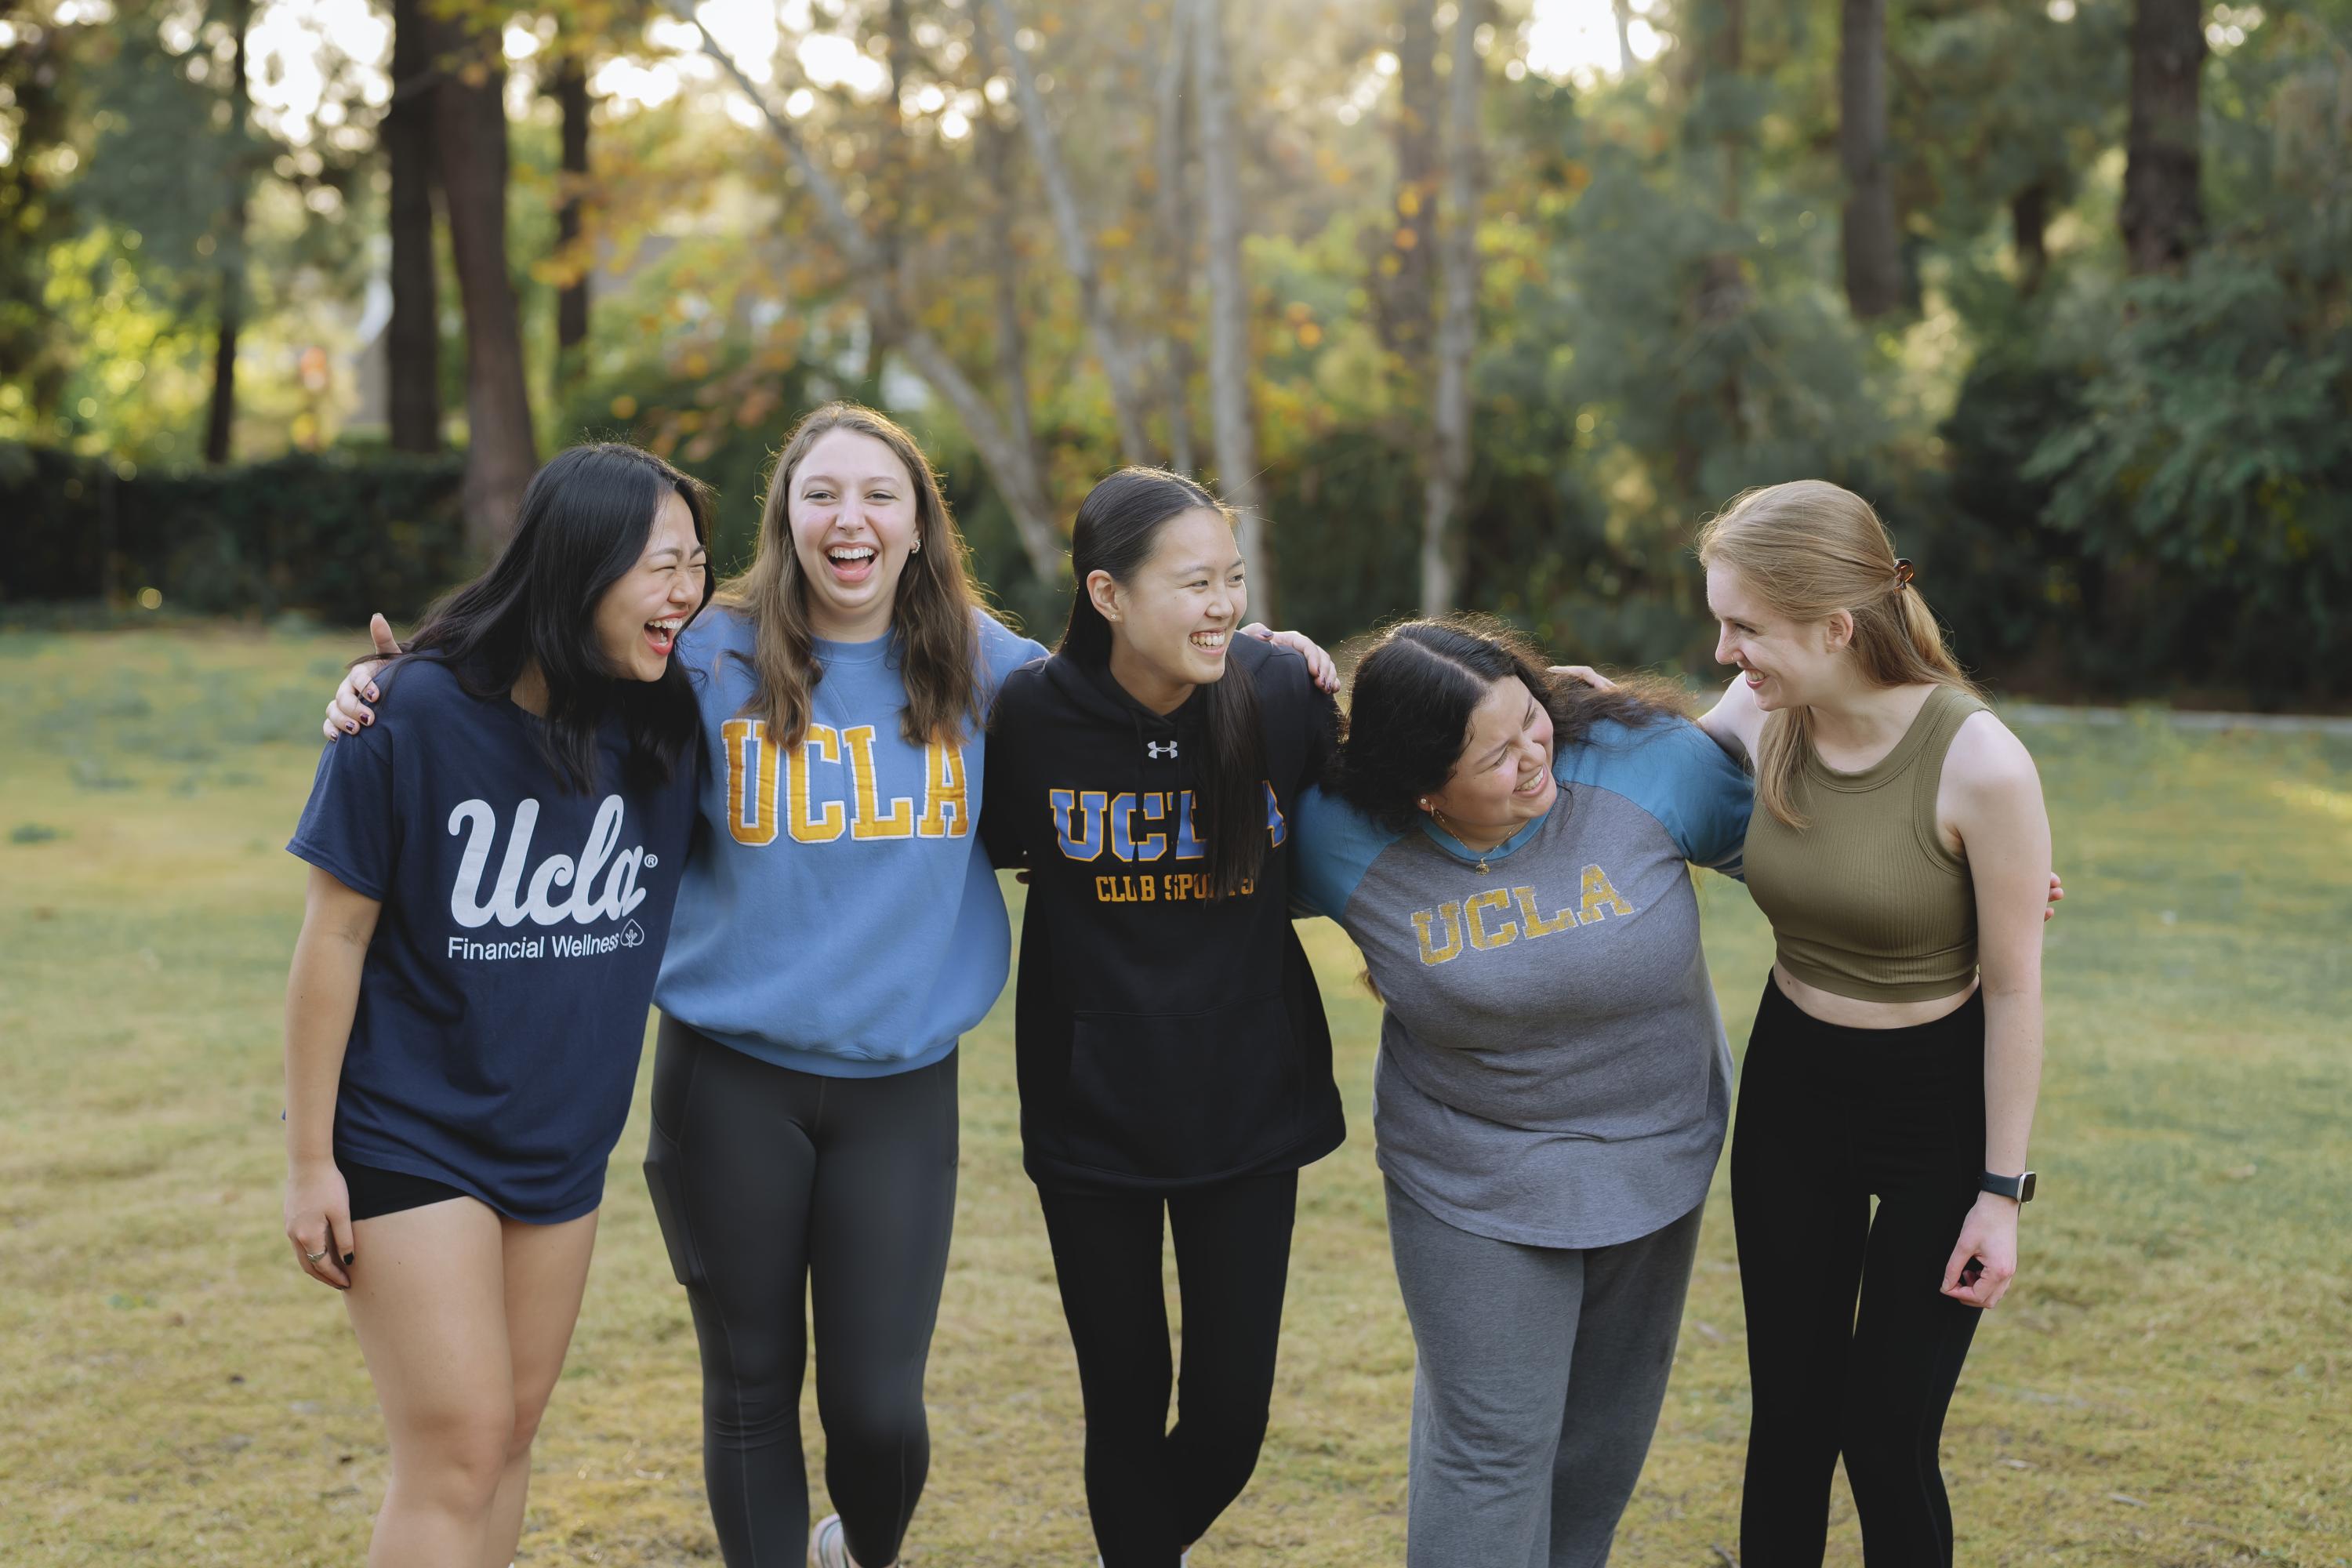 students standing together laughing on a field